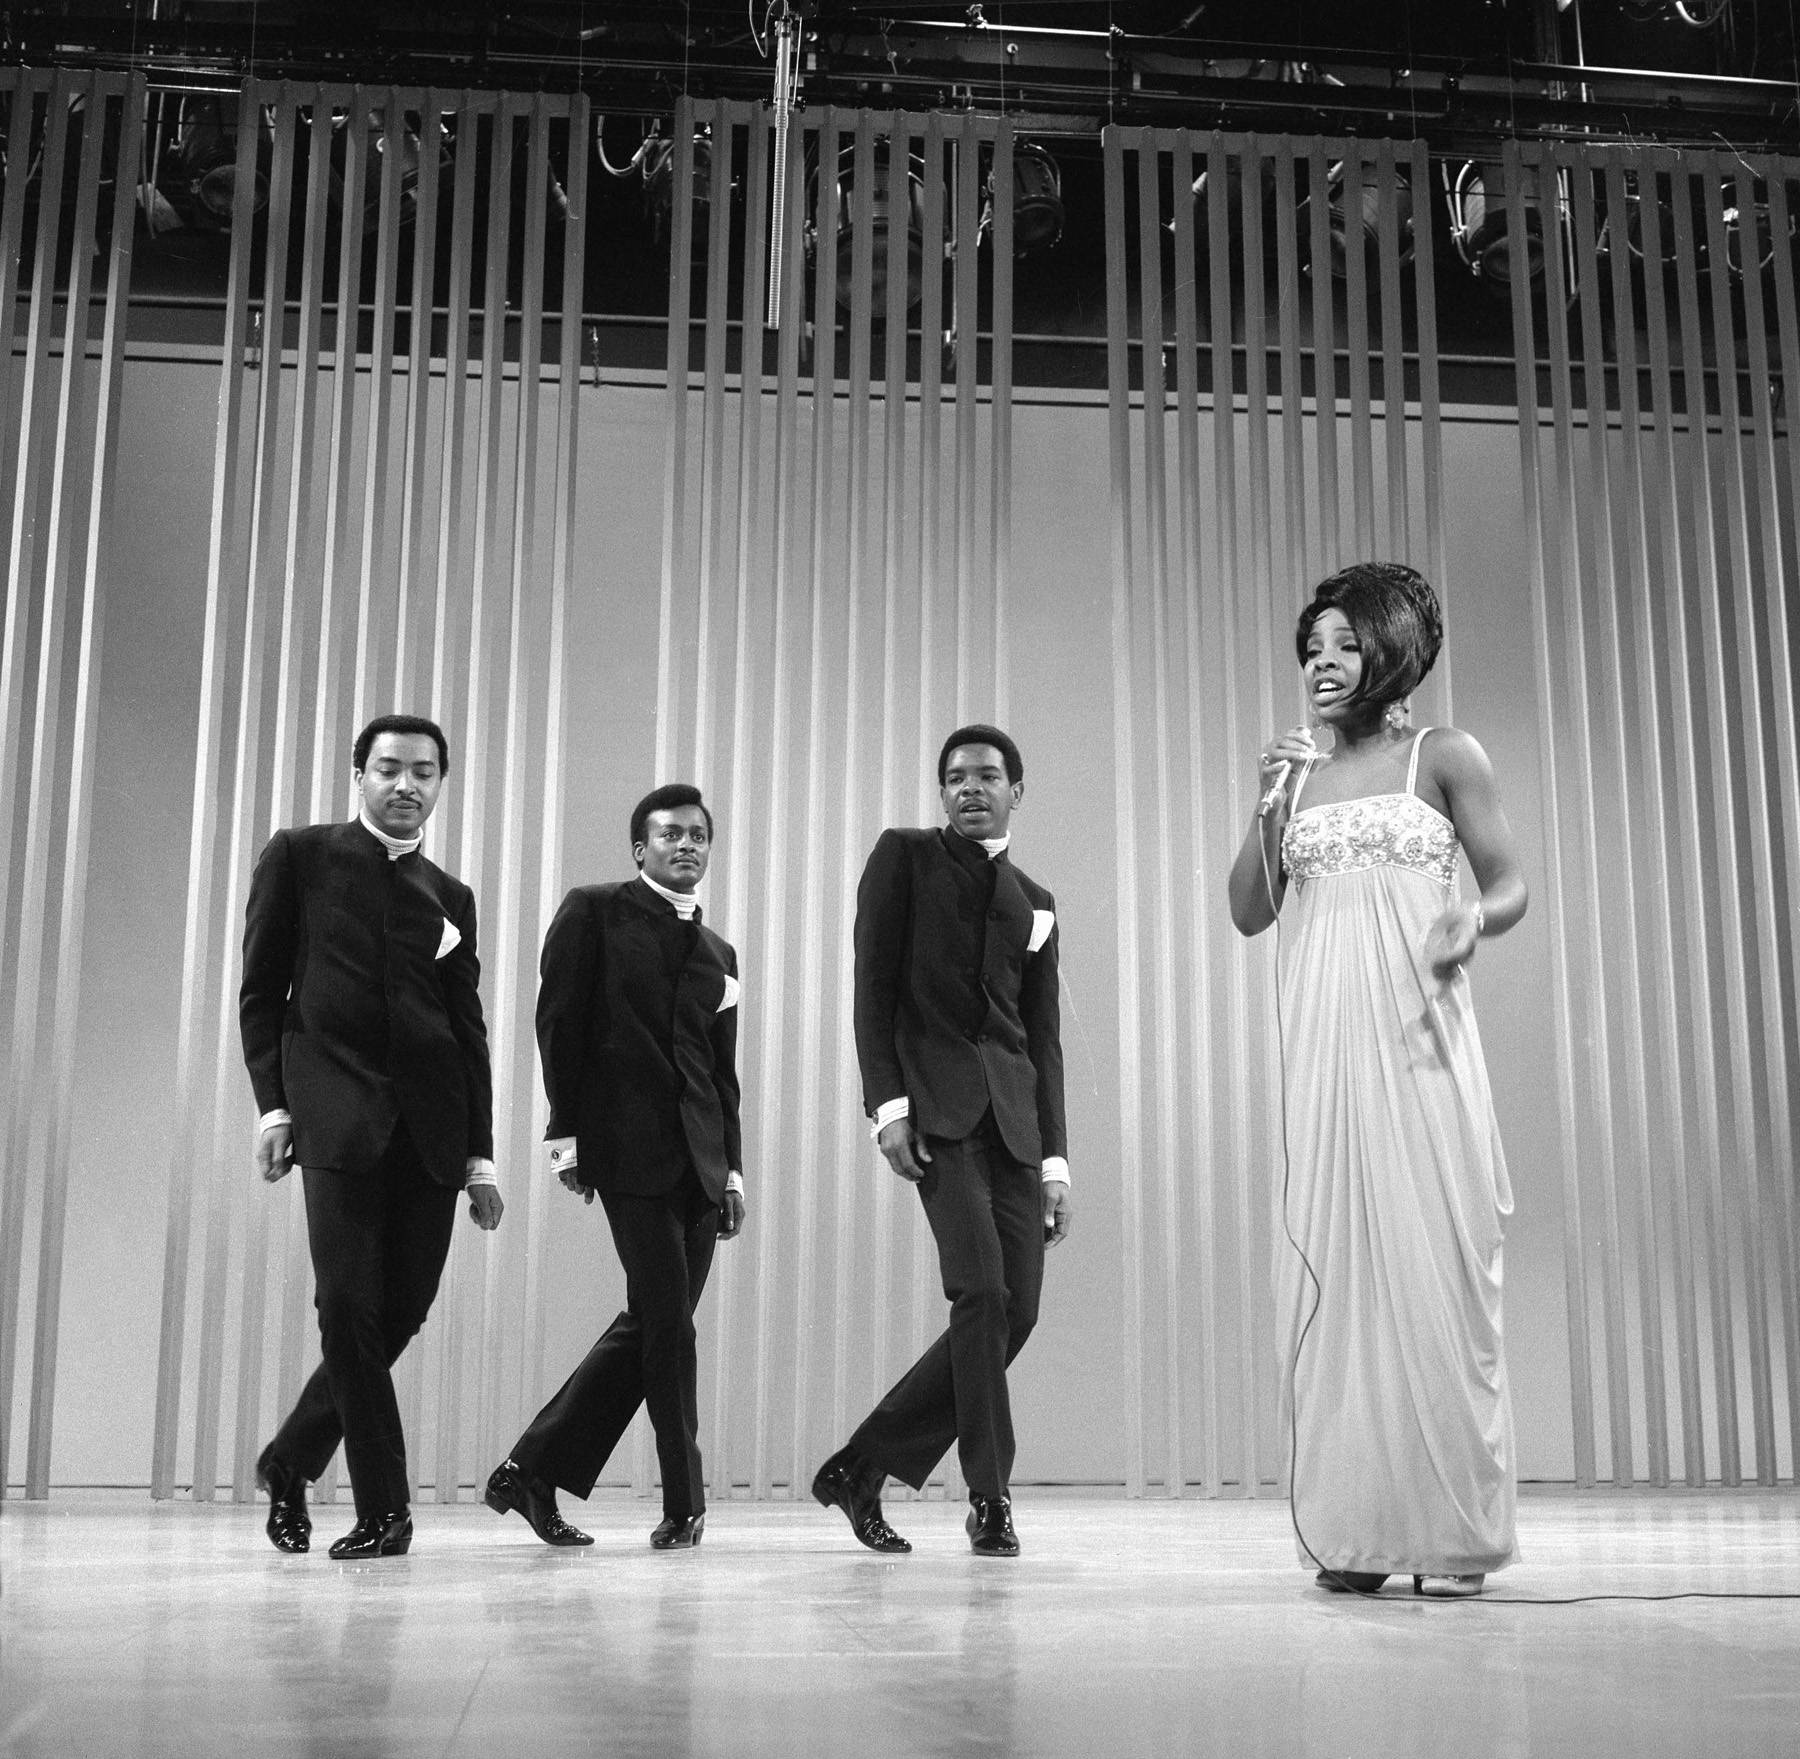 Gladys Knight and the Pips - Gladys Maria Knight began her career in the 1950s alongside her cousins &quot;The Pips&quot; after wiinning a TV Talent show. Gladys Knight and the Pips and Gladys herself would go on to have a slew of hit records over the next 40-plus years. Check the discography.(Photo: CBS /Landov)